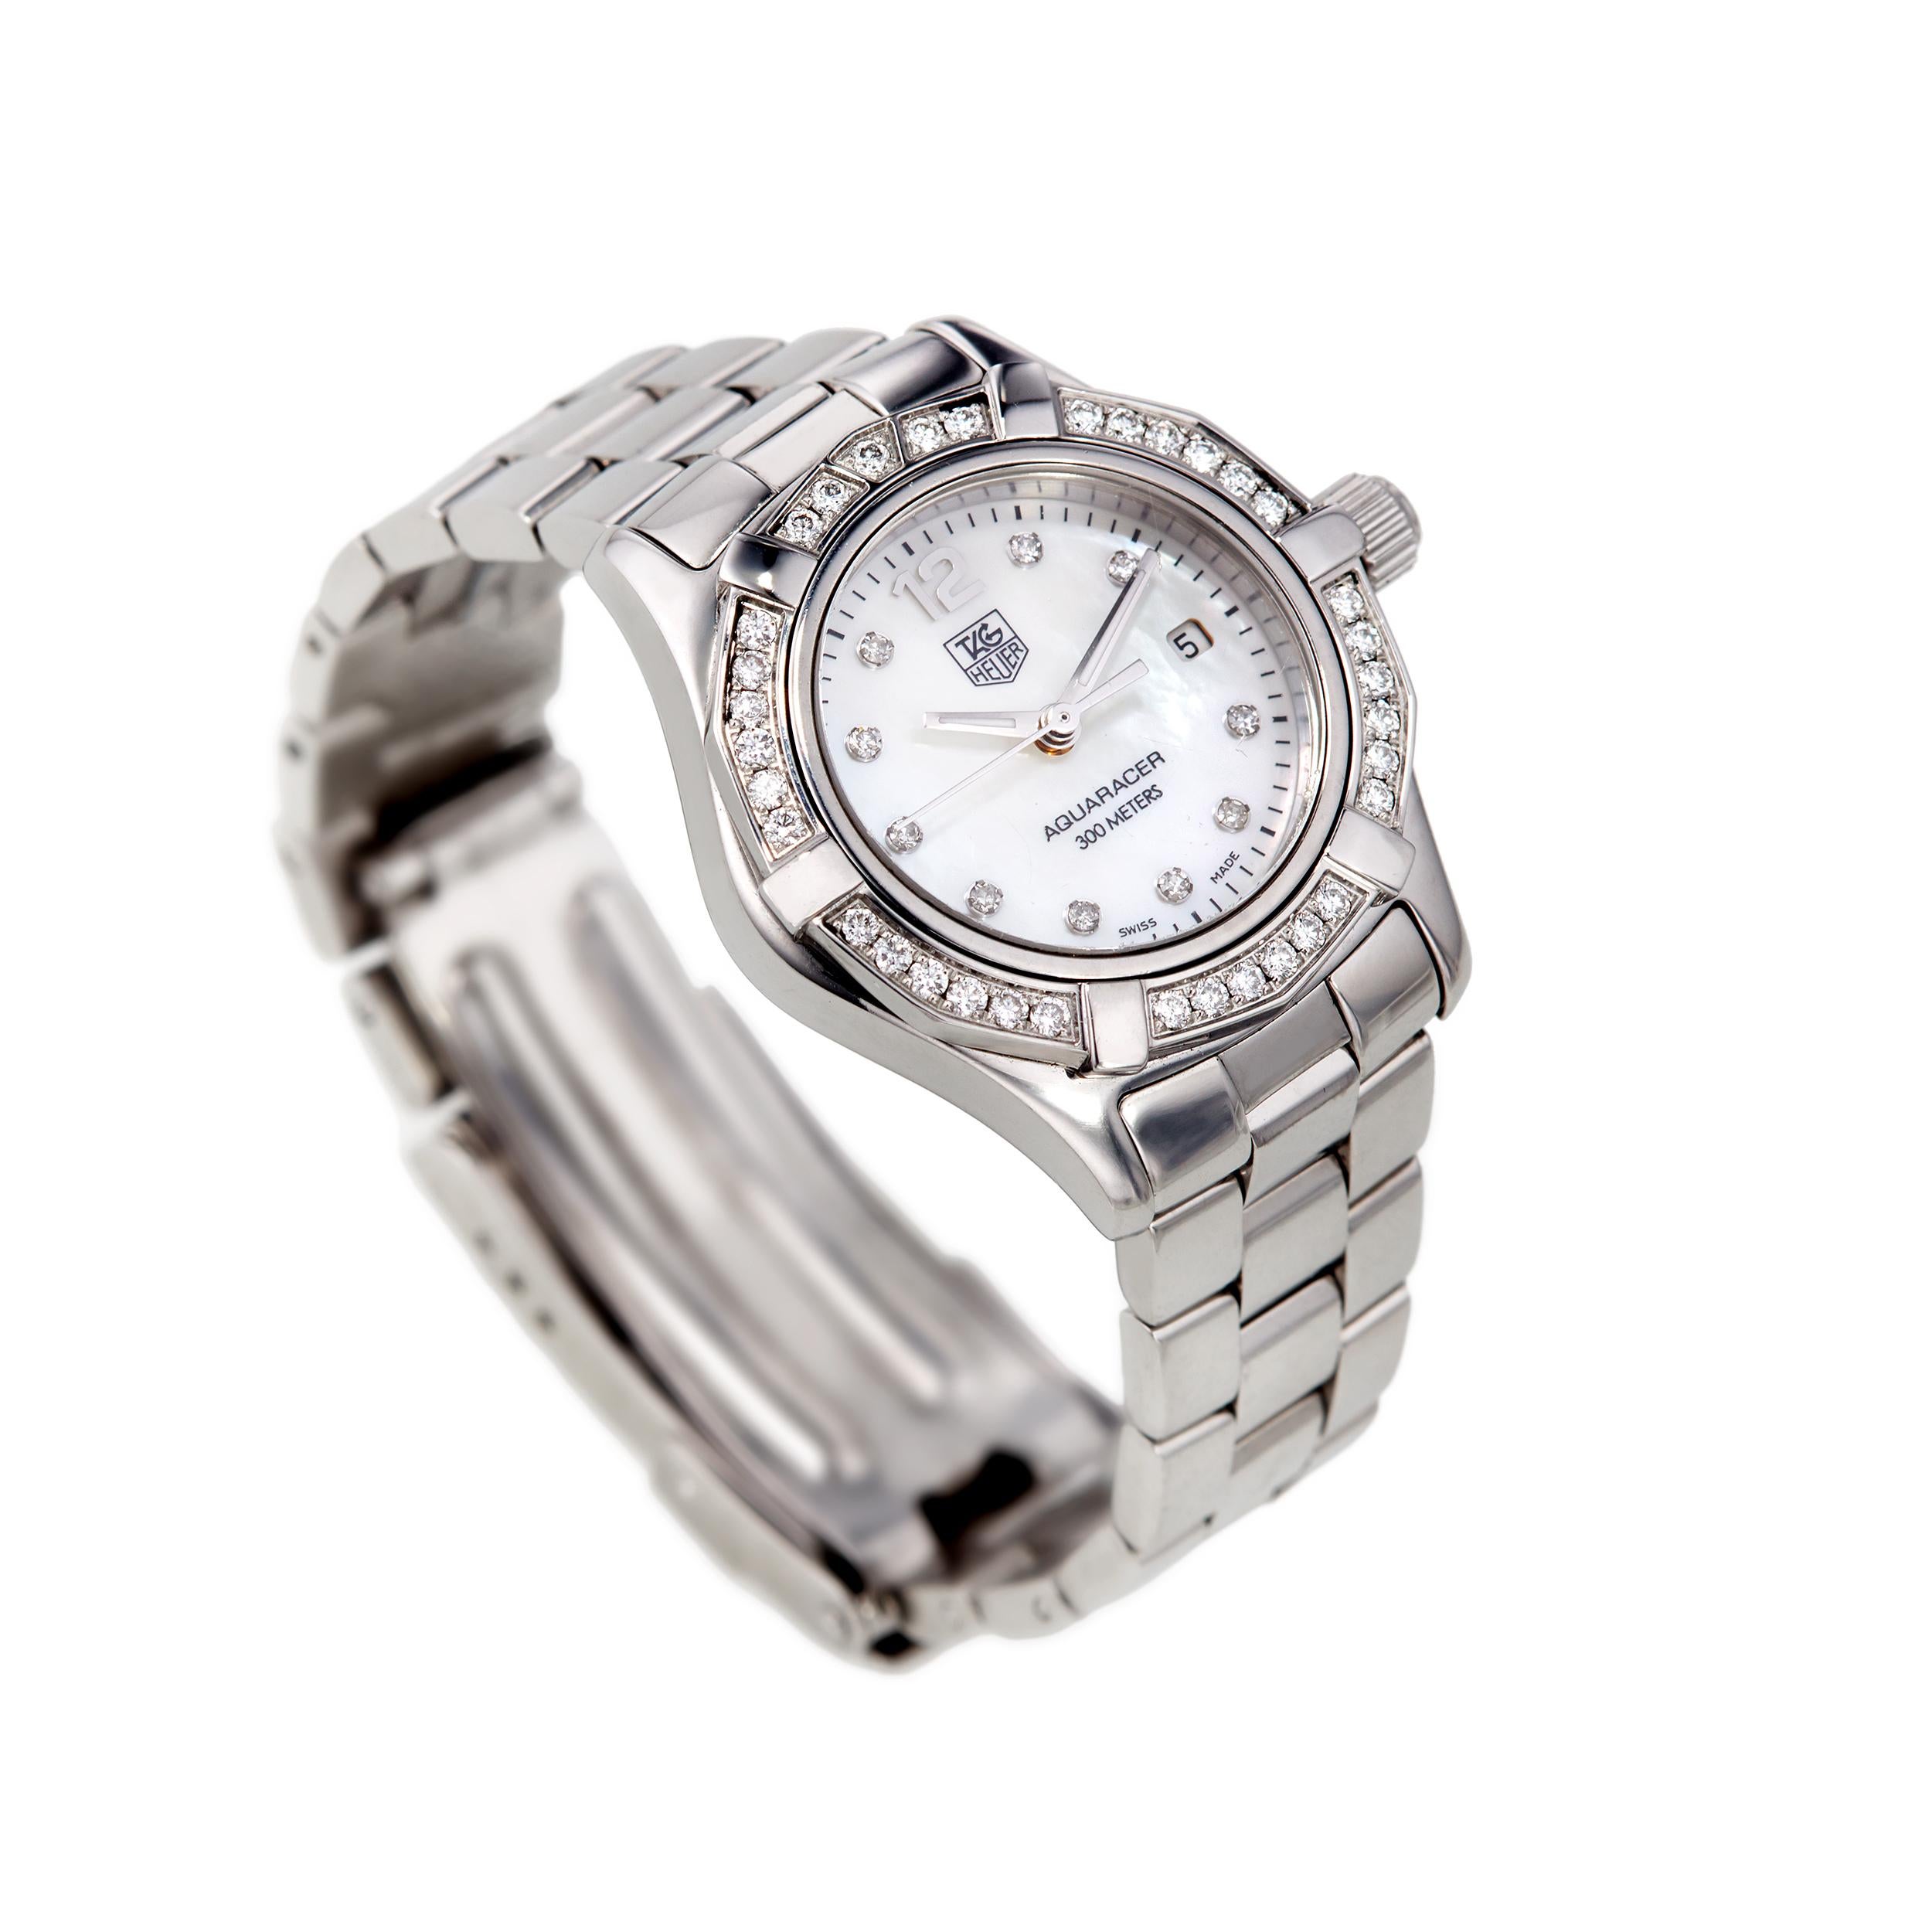 Fully refurbished and like new condition.  Stainless steel case with a stainless steel bracelet. Uni-directional rotating stainless steel bezel set with 30 diamonds. White mother of pearl dial with luminous silver-tone hands and diamond hour